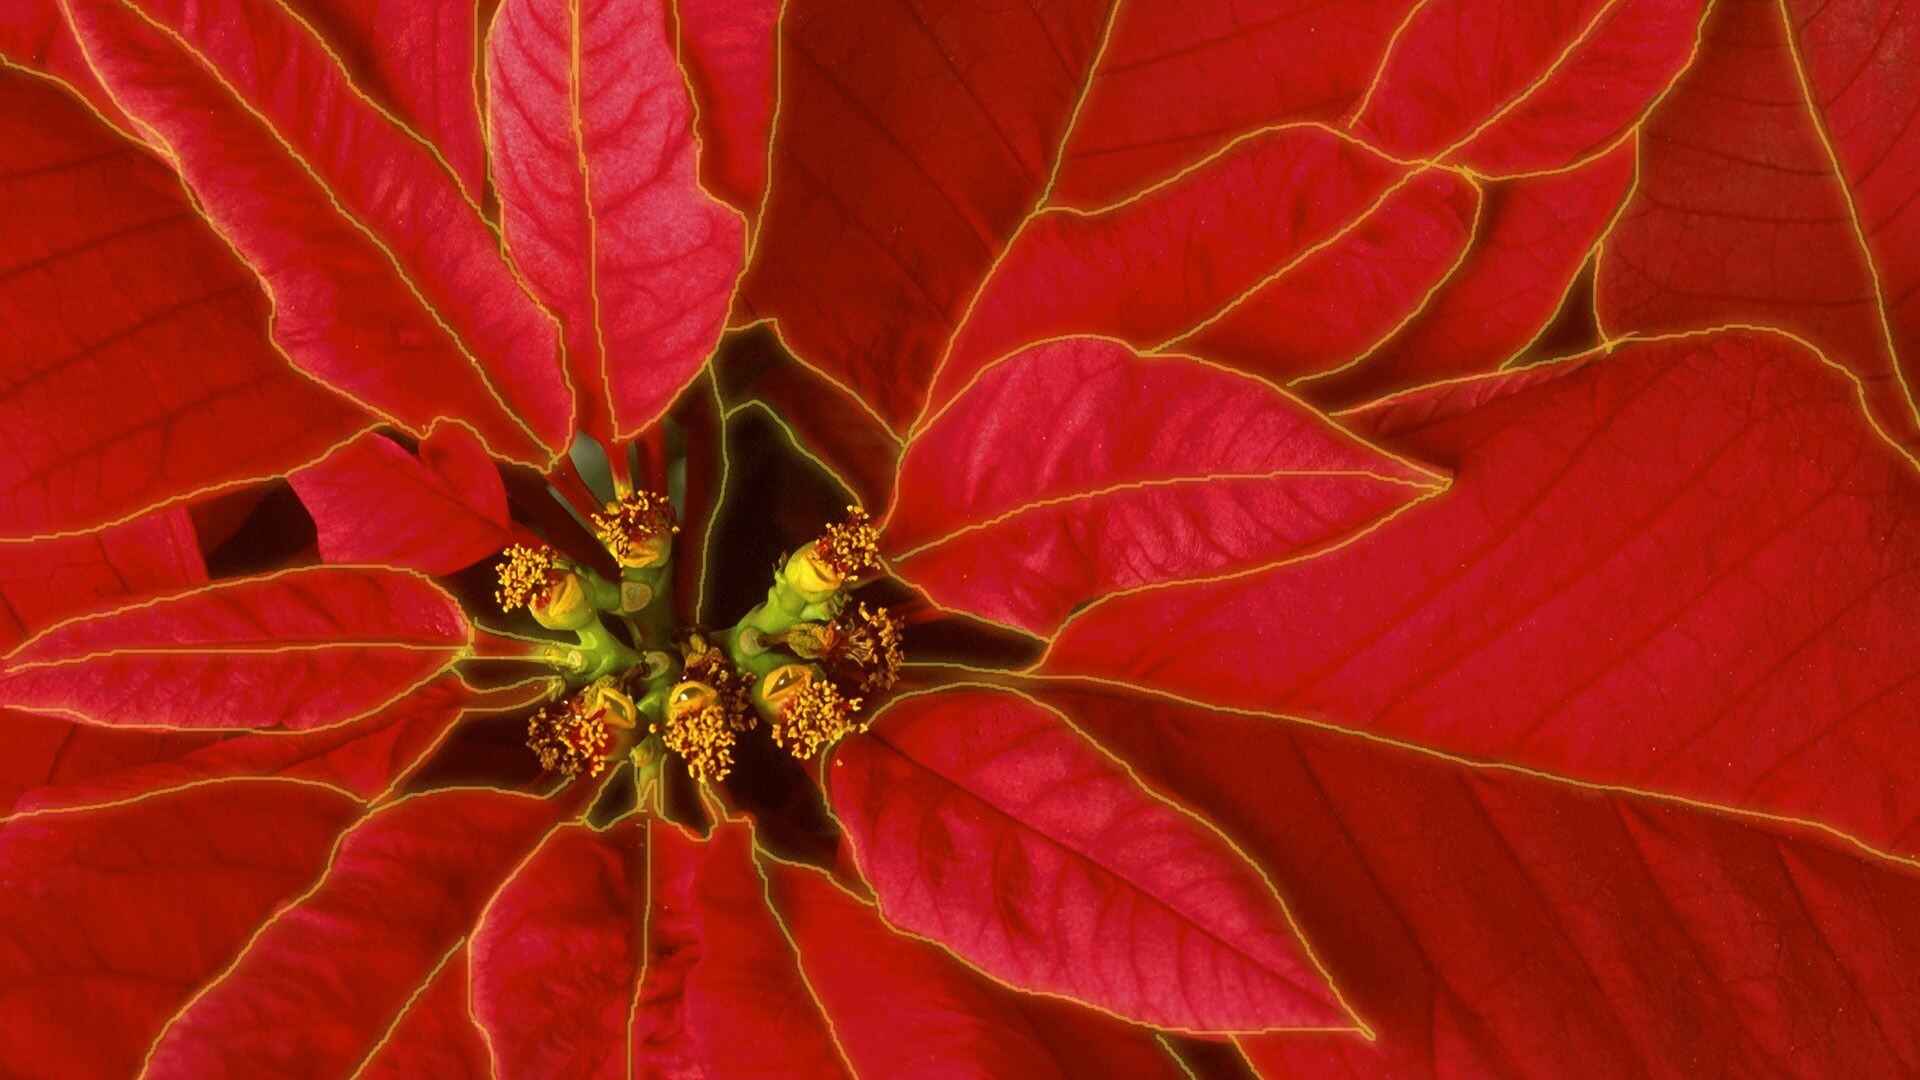 Poinsettia: The most popular holiday plant in the United States. 1920x1080 Full HD Wallpaper.